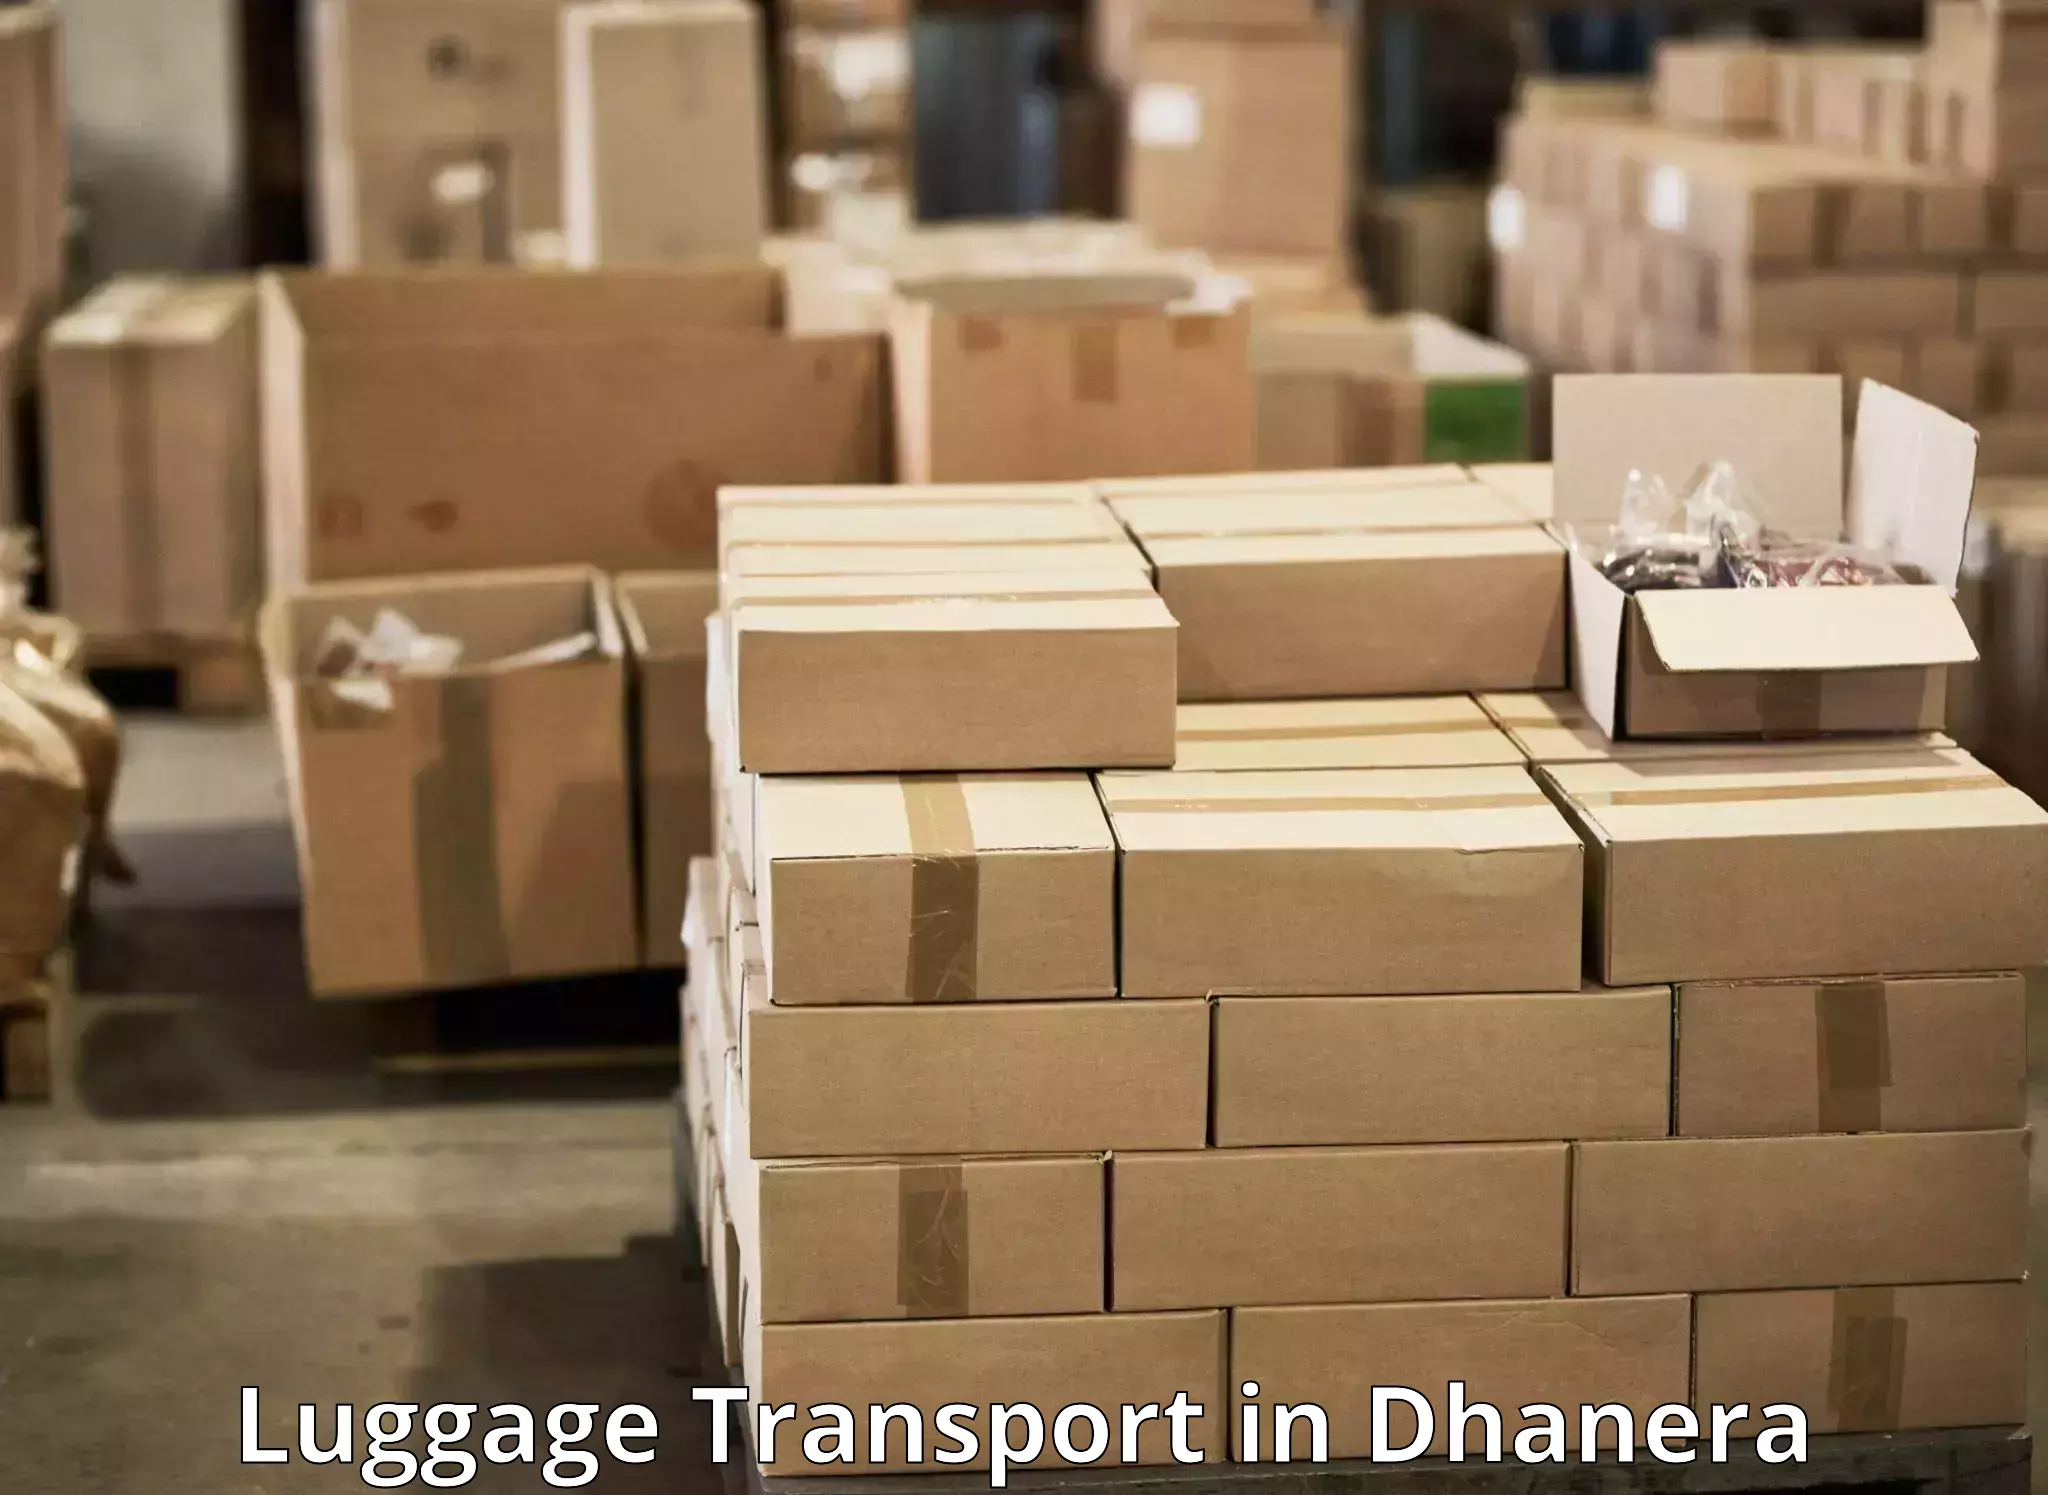 Hassle-free luggage shipping in Dhanera